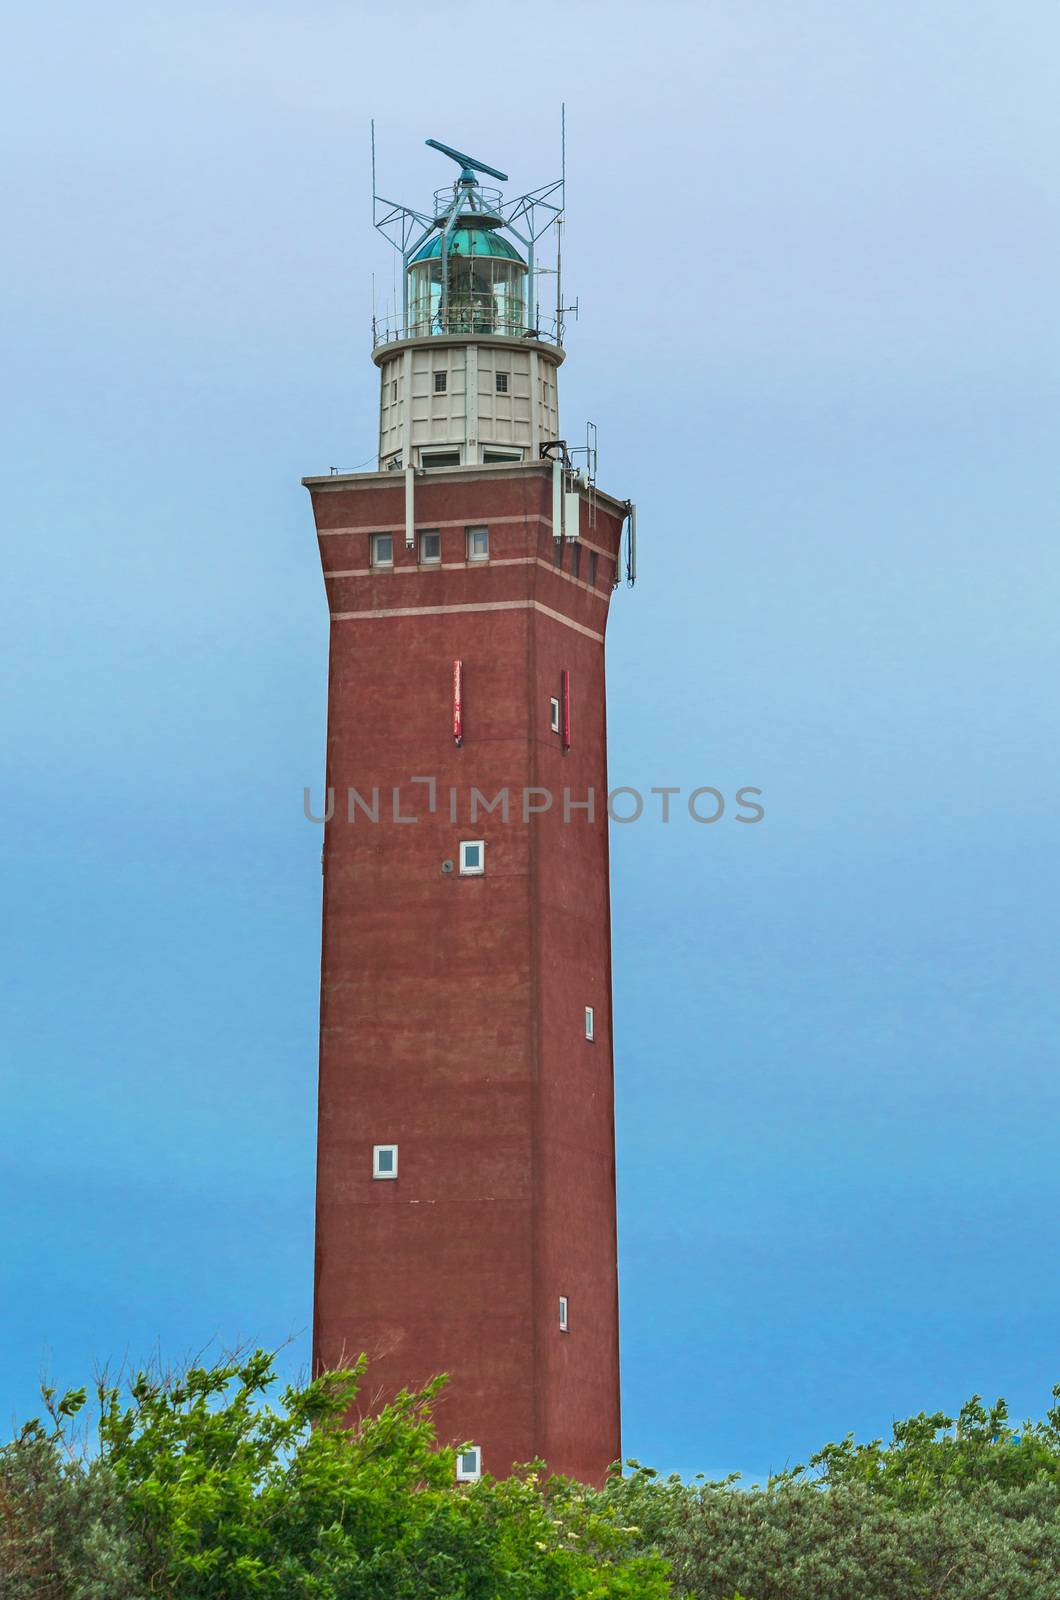 Lighthouse Vuurtoren Westhoofd - at Outdorp
Zealand in the Netherlands. Year 1947 high in operation since 1950, 56 meters.